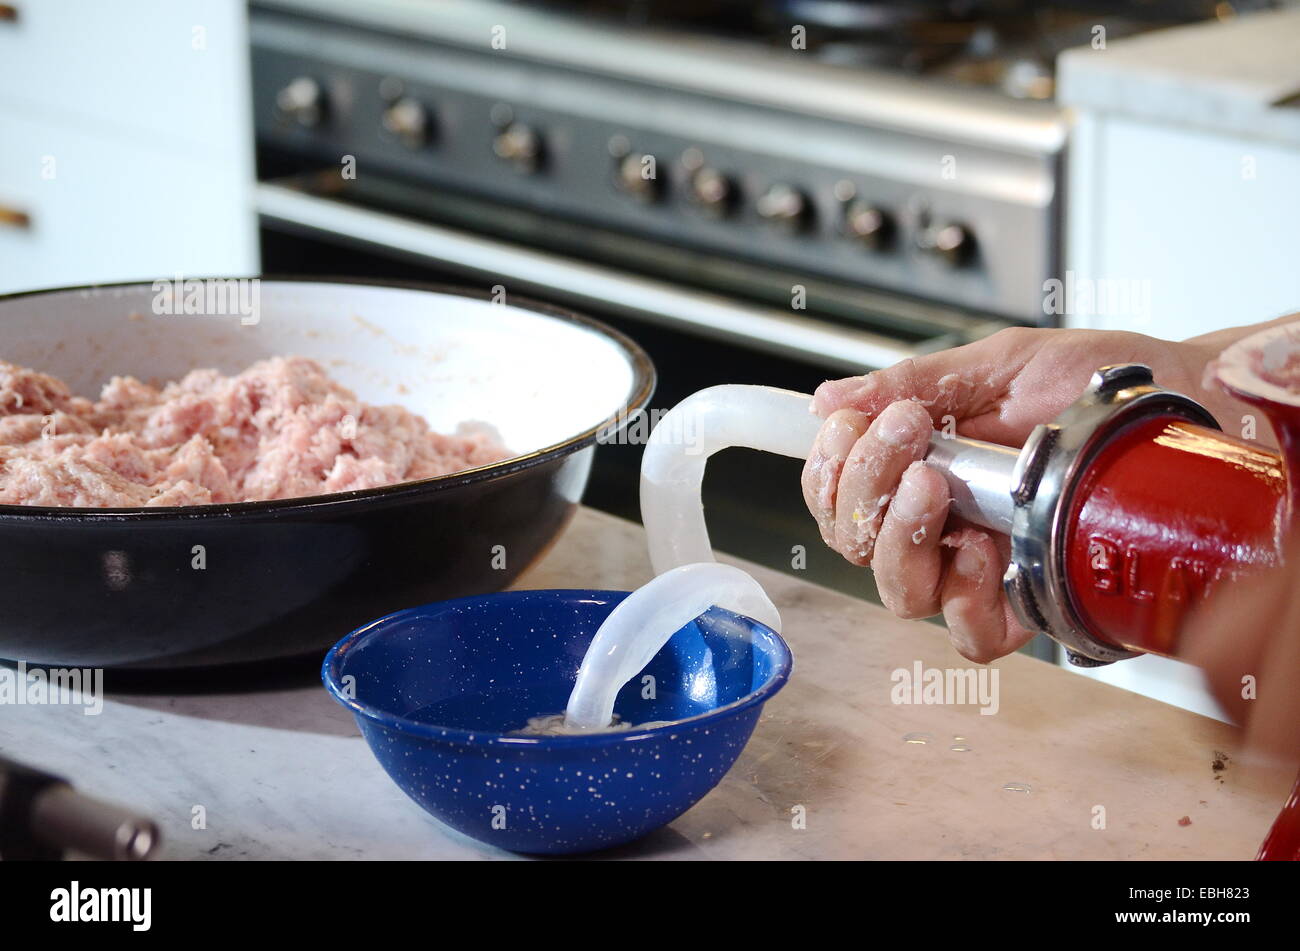 chef's hands using meat grinder to fill the casing to make a pork sausage Stock Photo